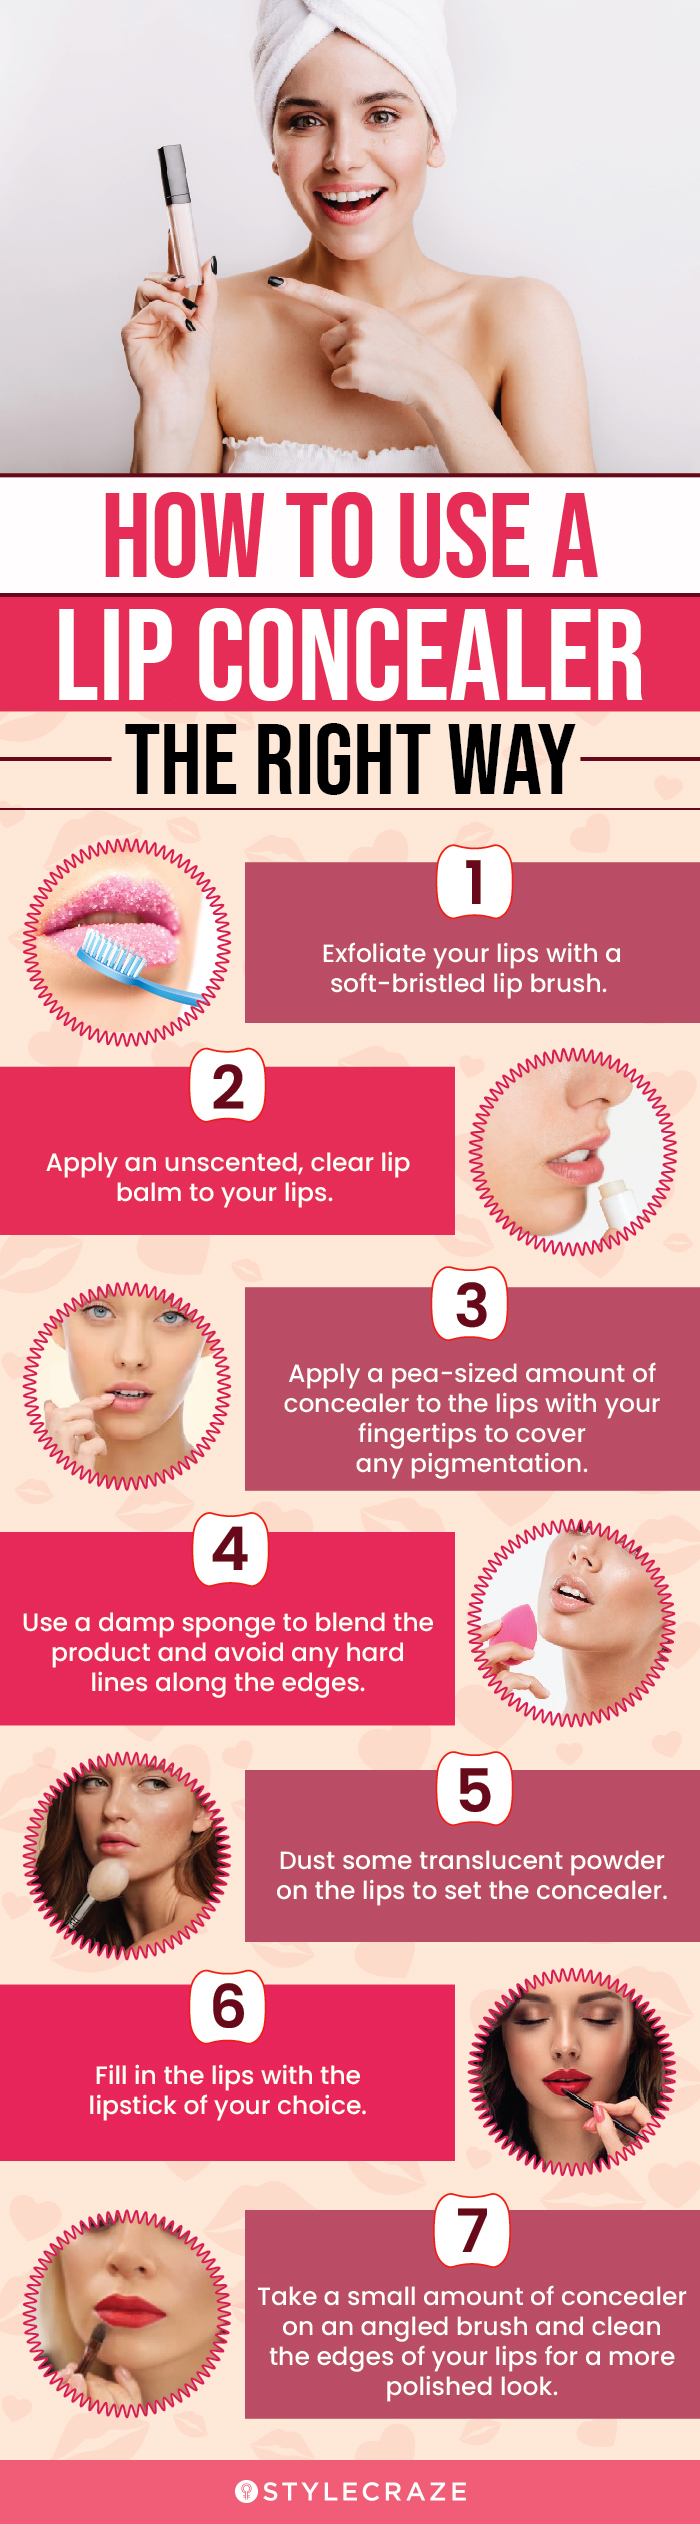 How To Use A Lip Concealer The Right Way (infographic)